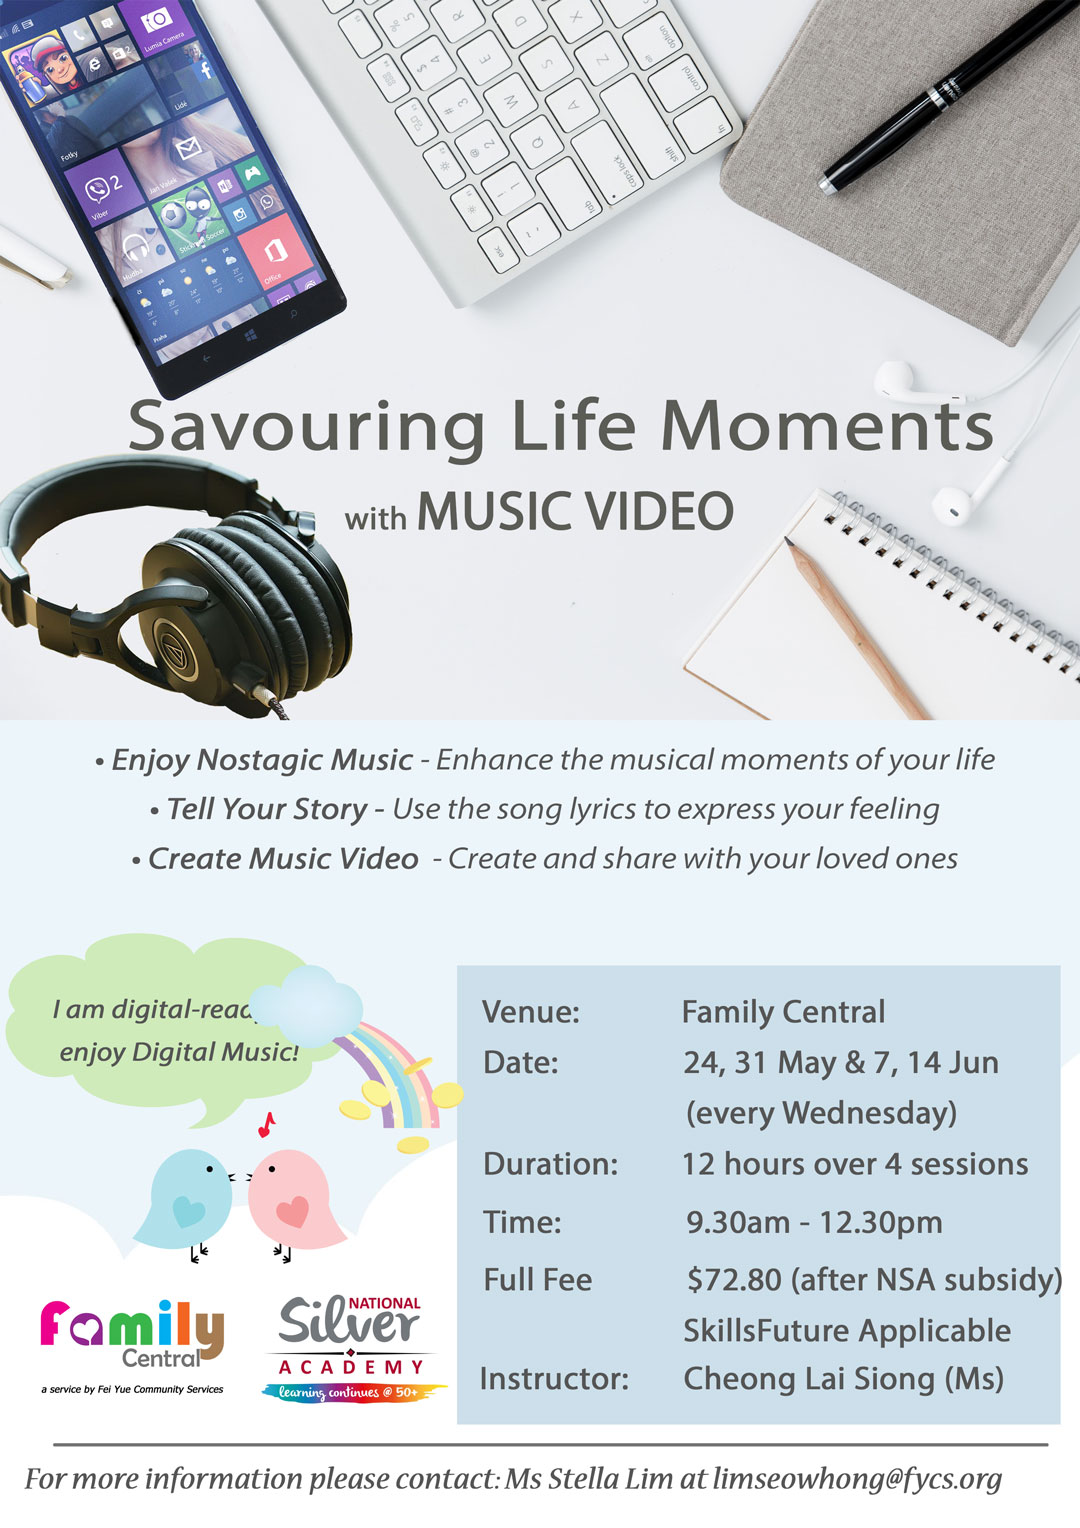 Savouring Life Moments with Music Video at Family Central